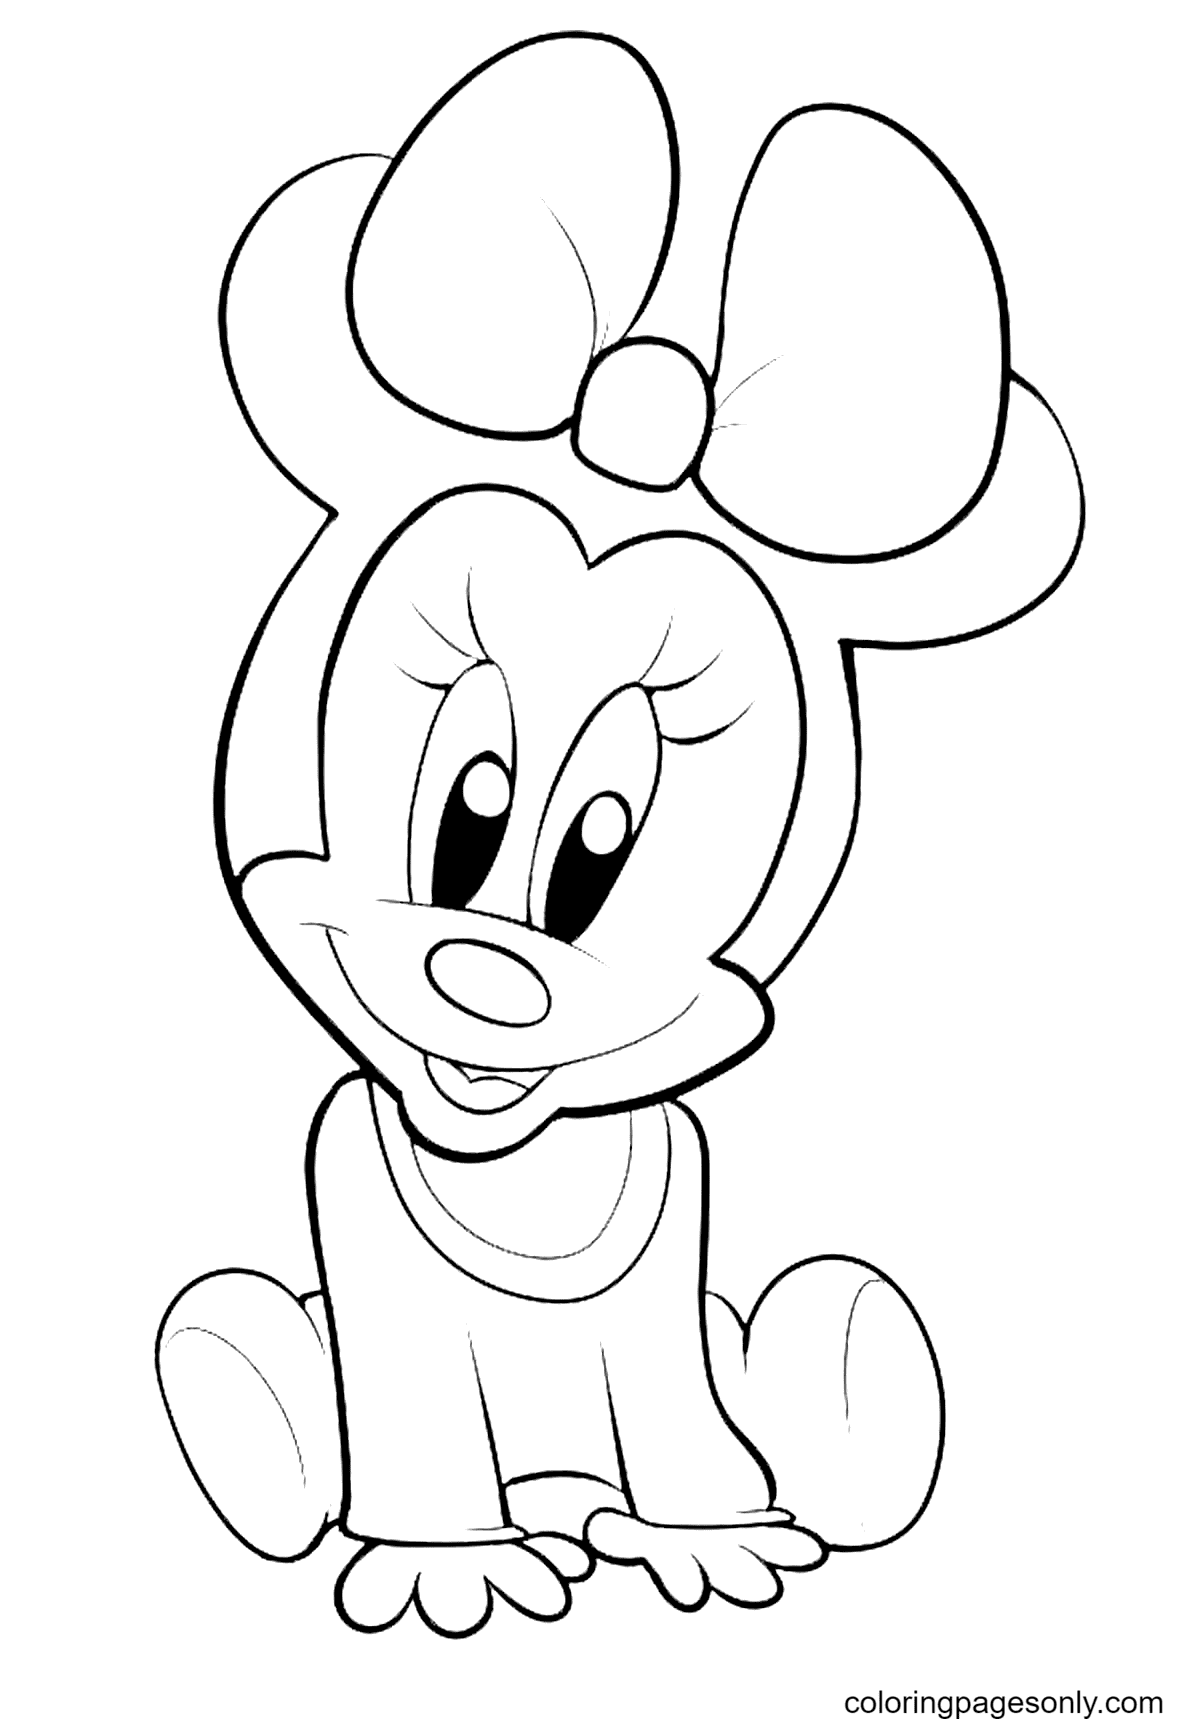 Pretty Baby Minnie Mouse Coloring Page